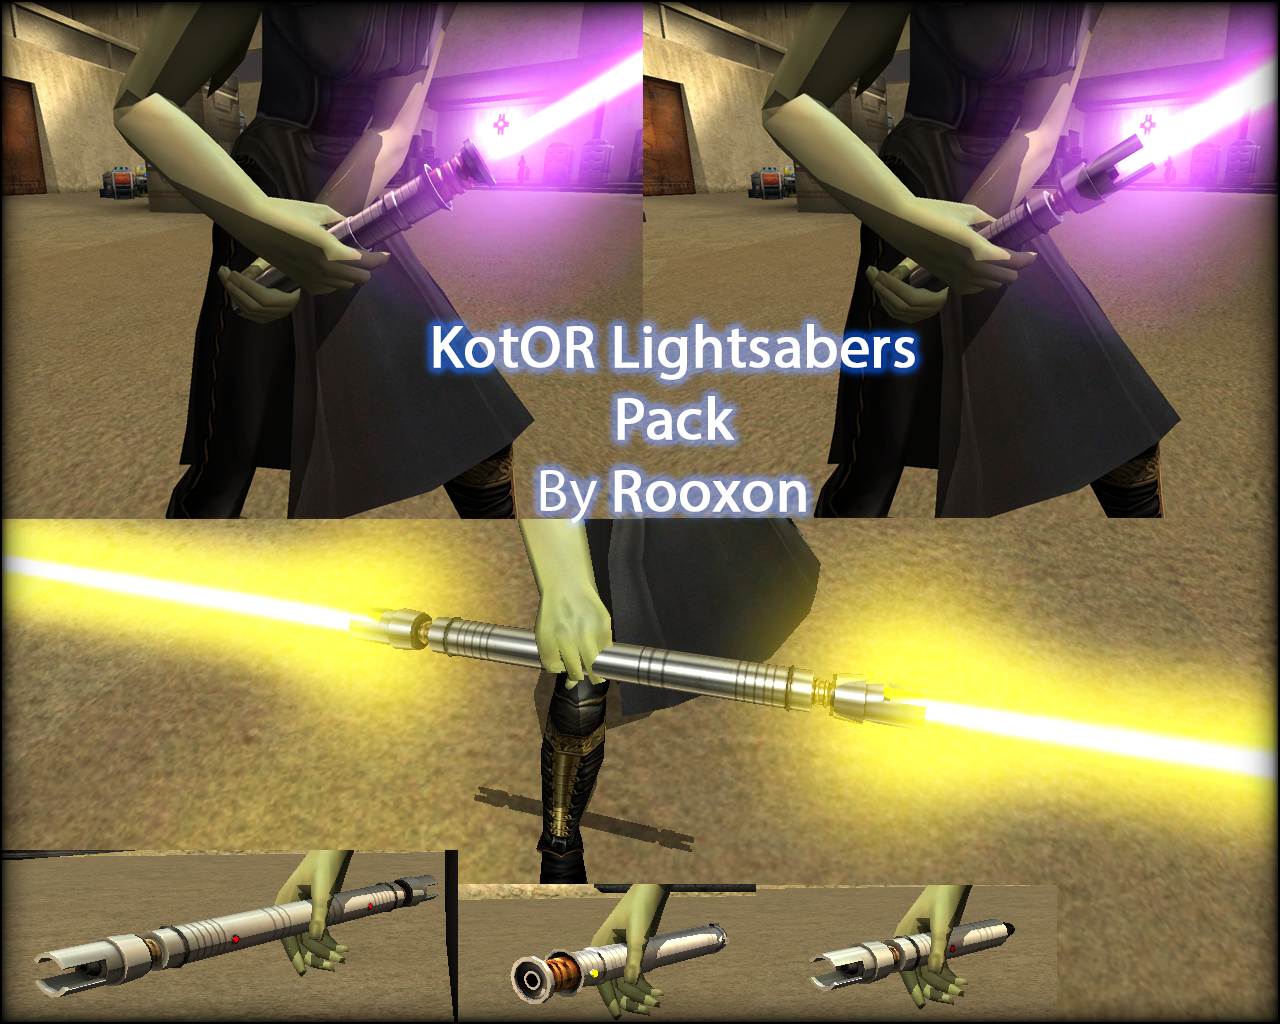 More information about "KotOR Lightsabers Pack"